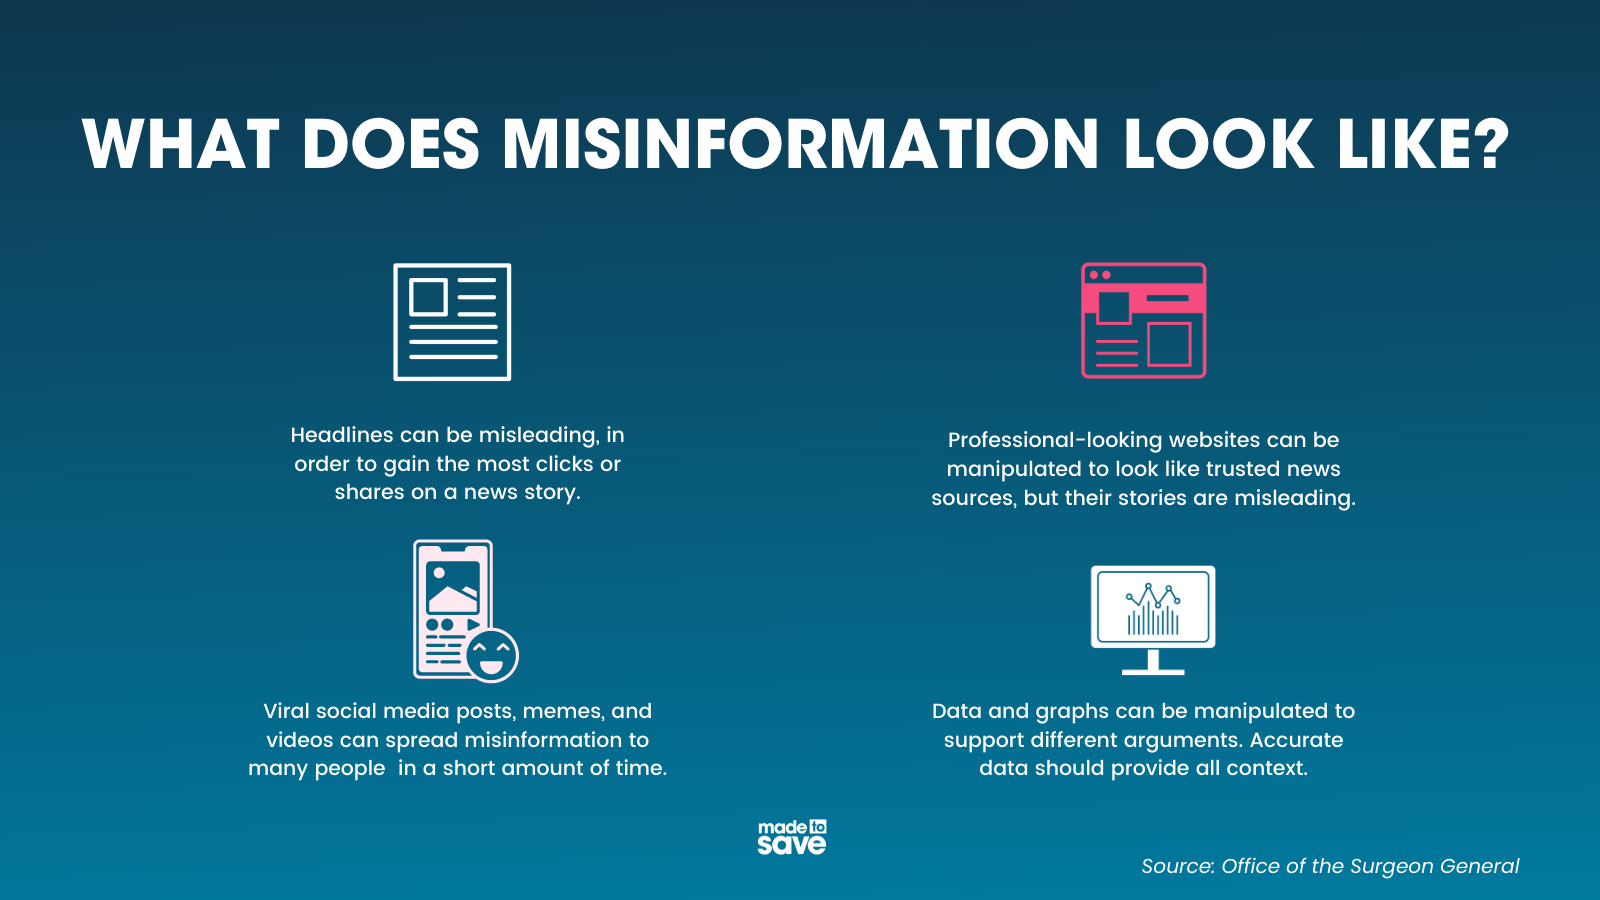 Graphic with dark blue background. The header reads, "What does misinformation look like." The graphic includes four symbols & four groups of text. Misinformation can look like misleading headlines, fake websites that look official, viral social media posts, and manipulated data. Human Health Services was the source for the information provided. The Made to Save logo is centered at the bottom of the graphic.